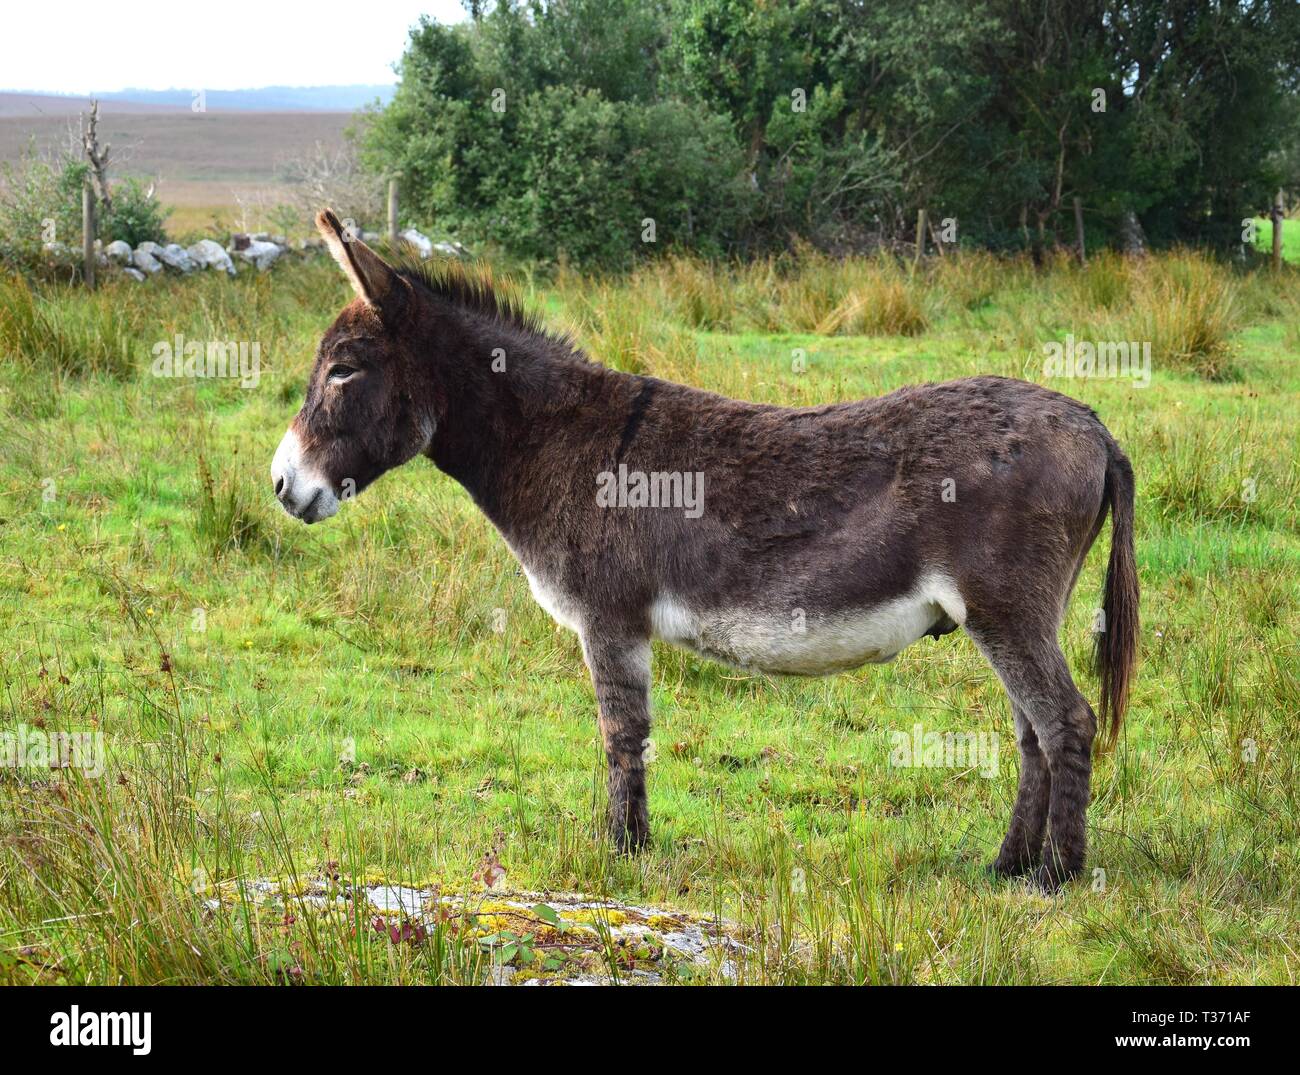 A donkey with zebra stripes on its legs on a meadow in Ireland. Stock Photo